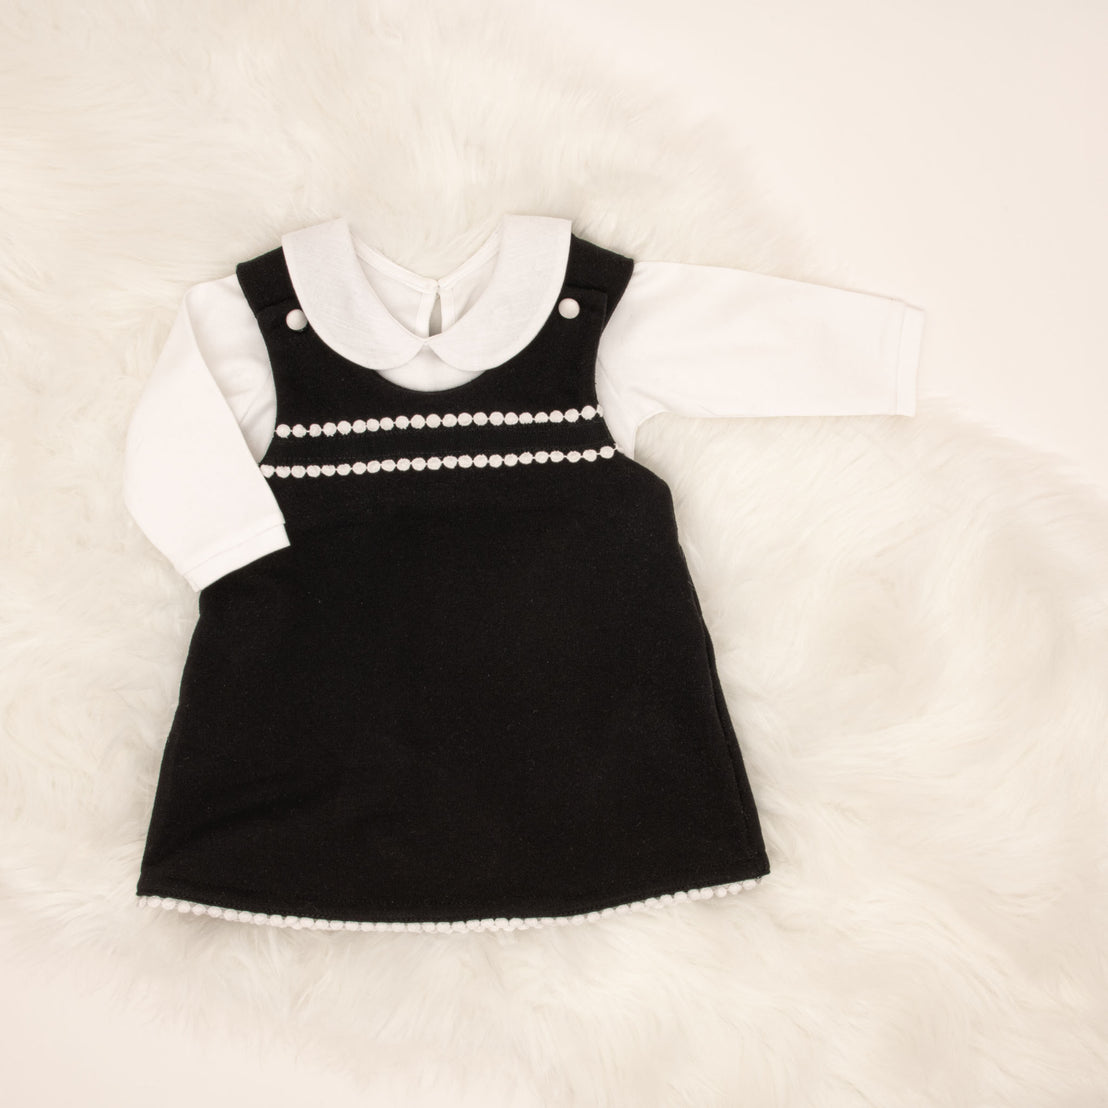 A baby's June Jumper Dress Set with white accents and pearl details for after christening, displayed on a soft, white furry surface. The dress features a layered look with a white long-sleeved shirt.